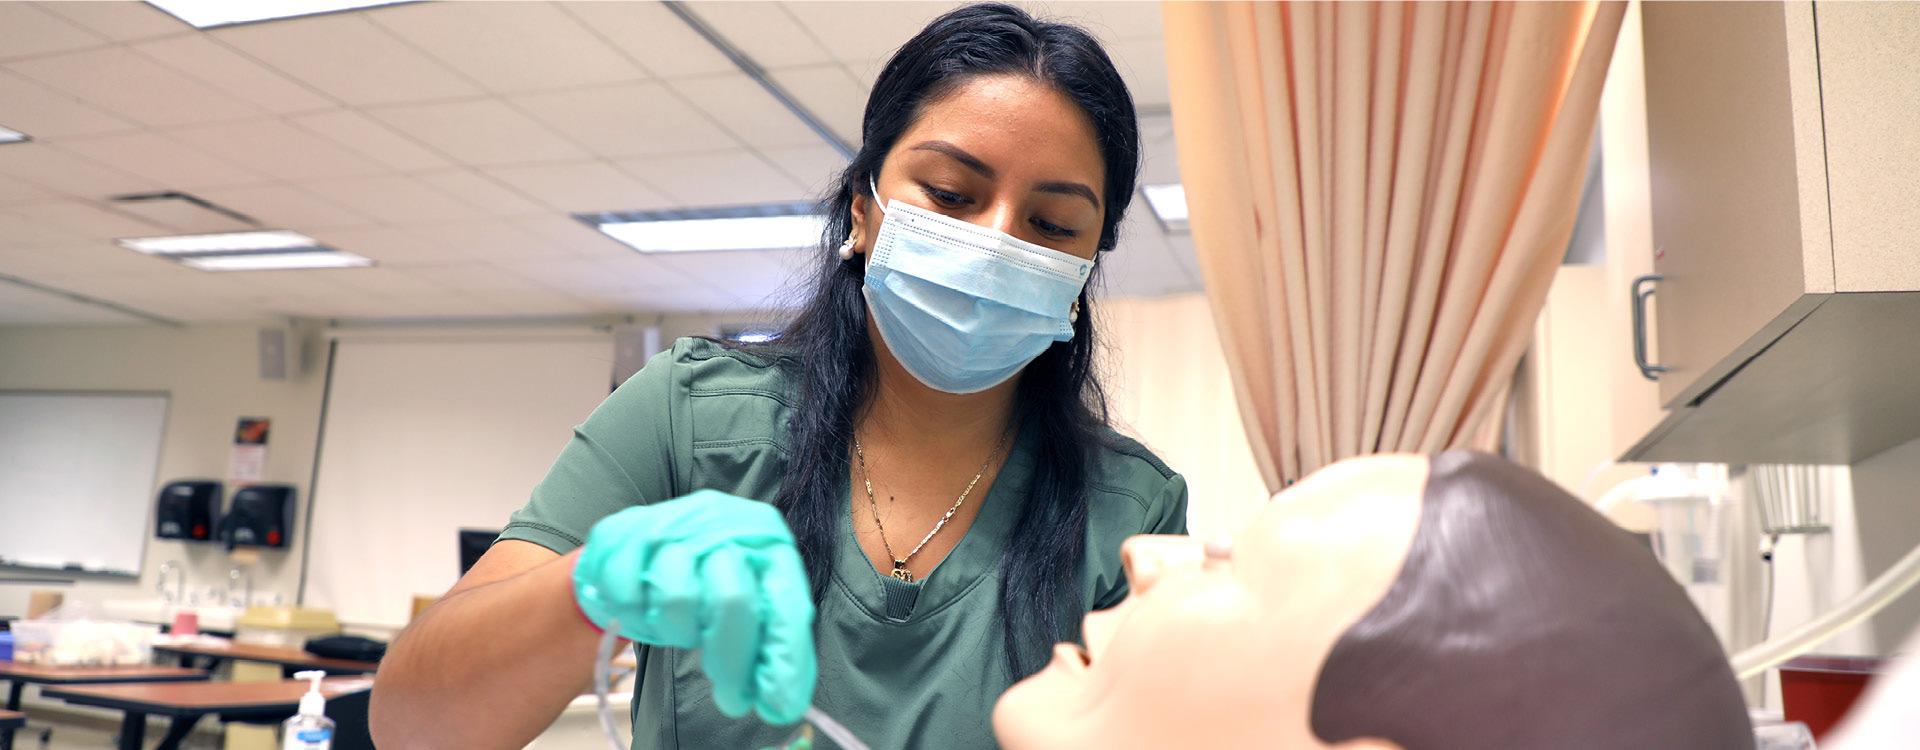 respiratory therapy student wears hospital mask while in a clinical lab class